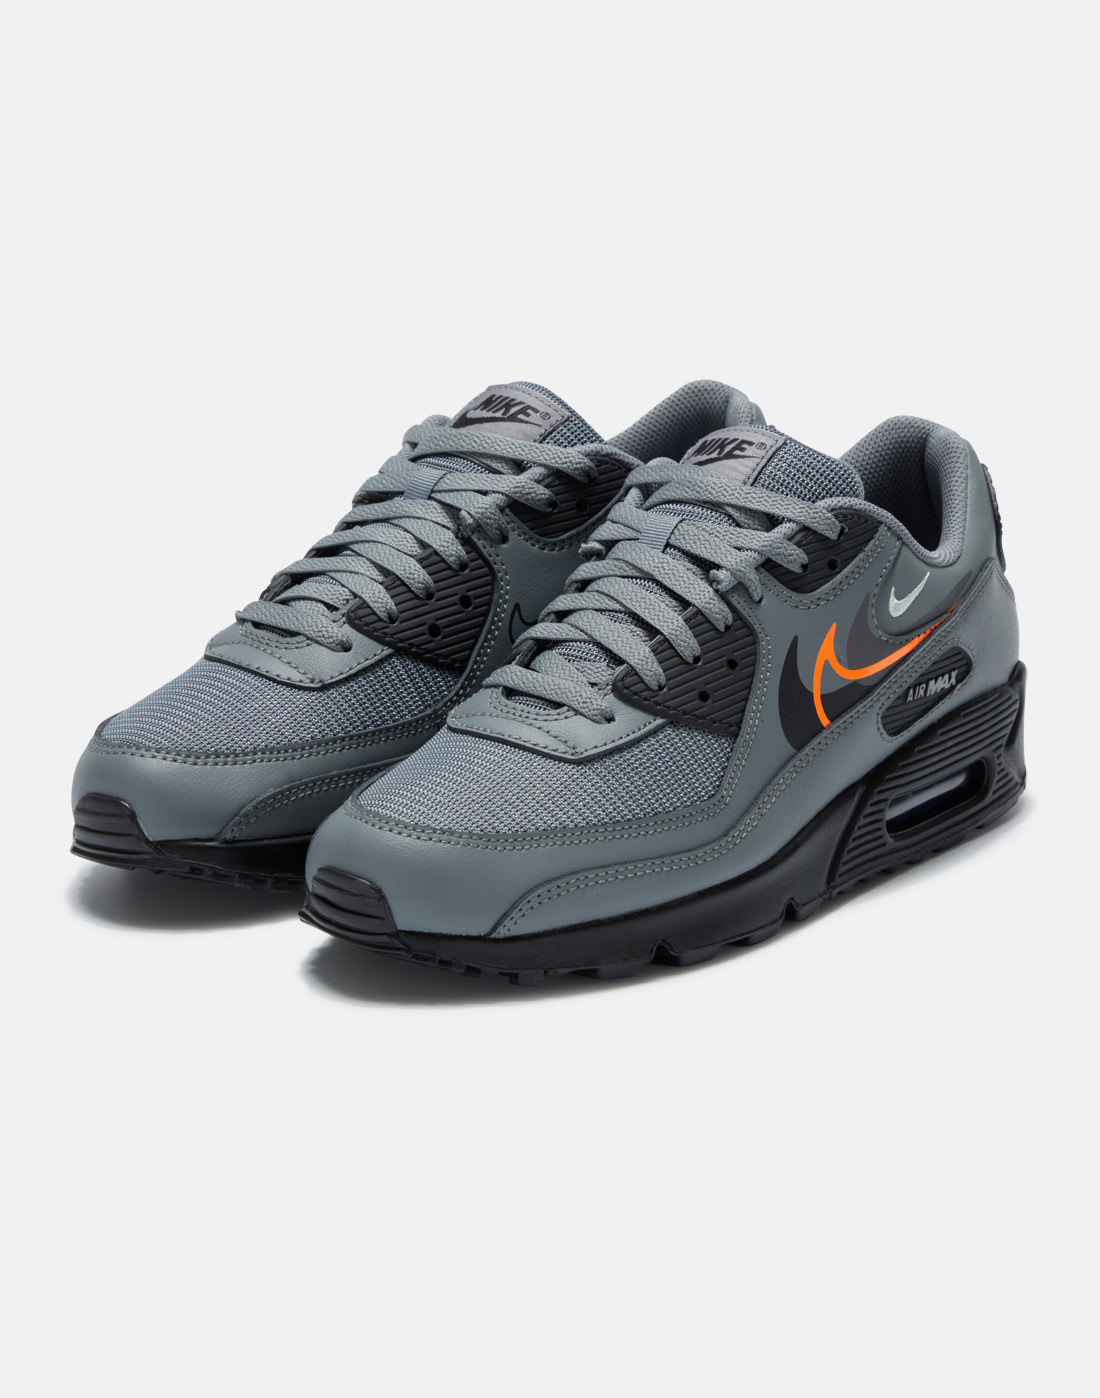 Nike Mens Air Max 90 - Grey | Life Style Sports IE